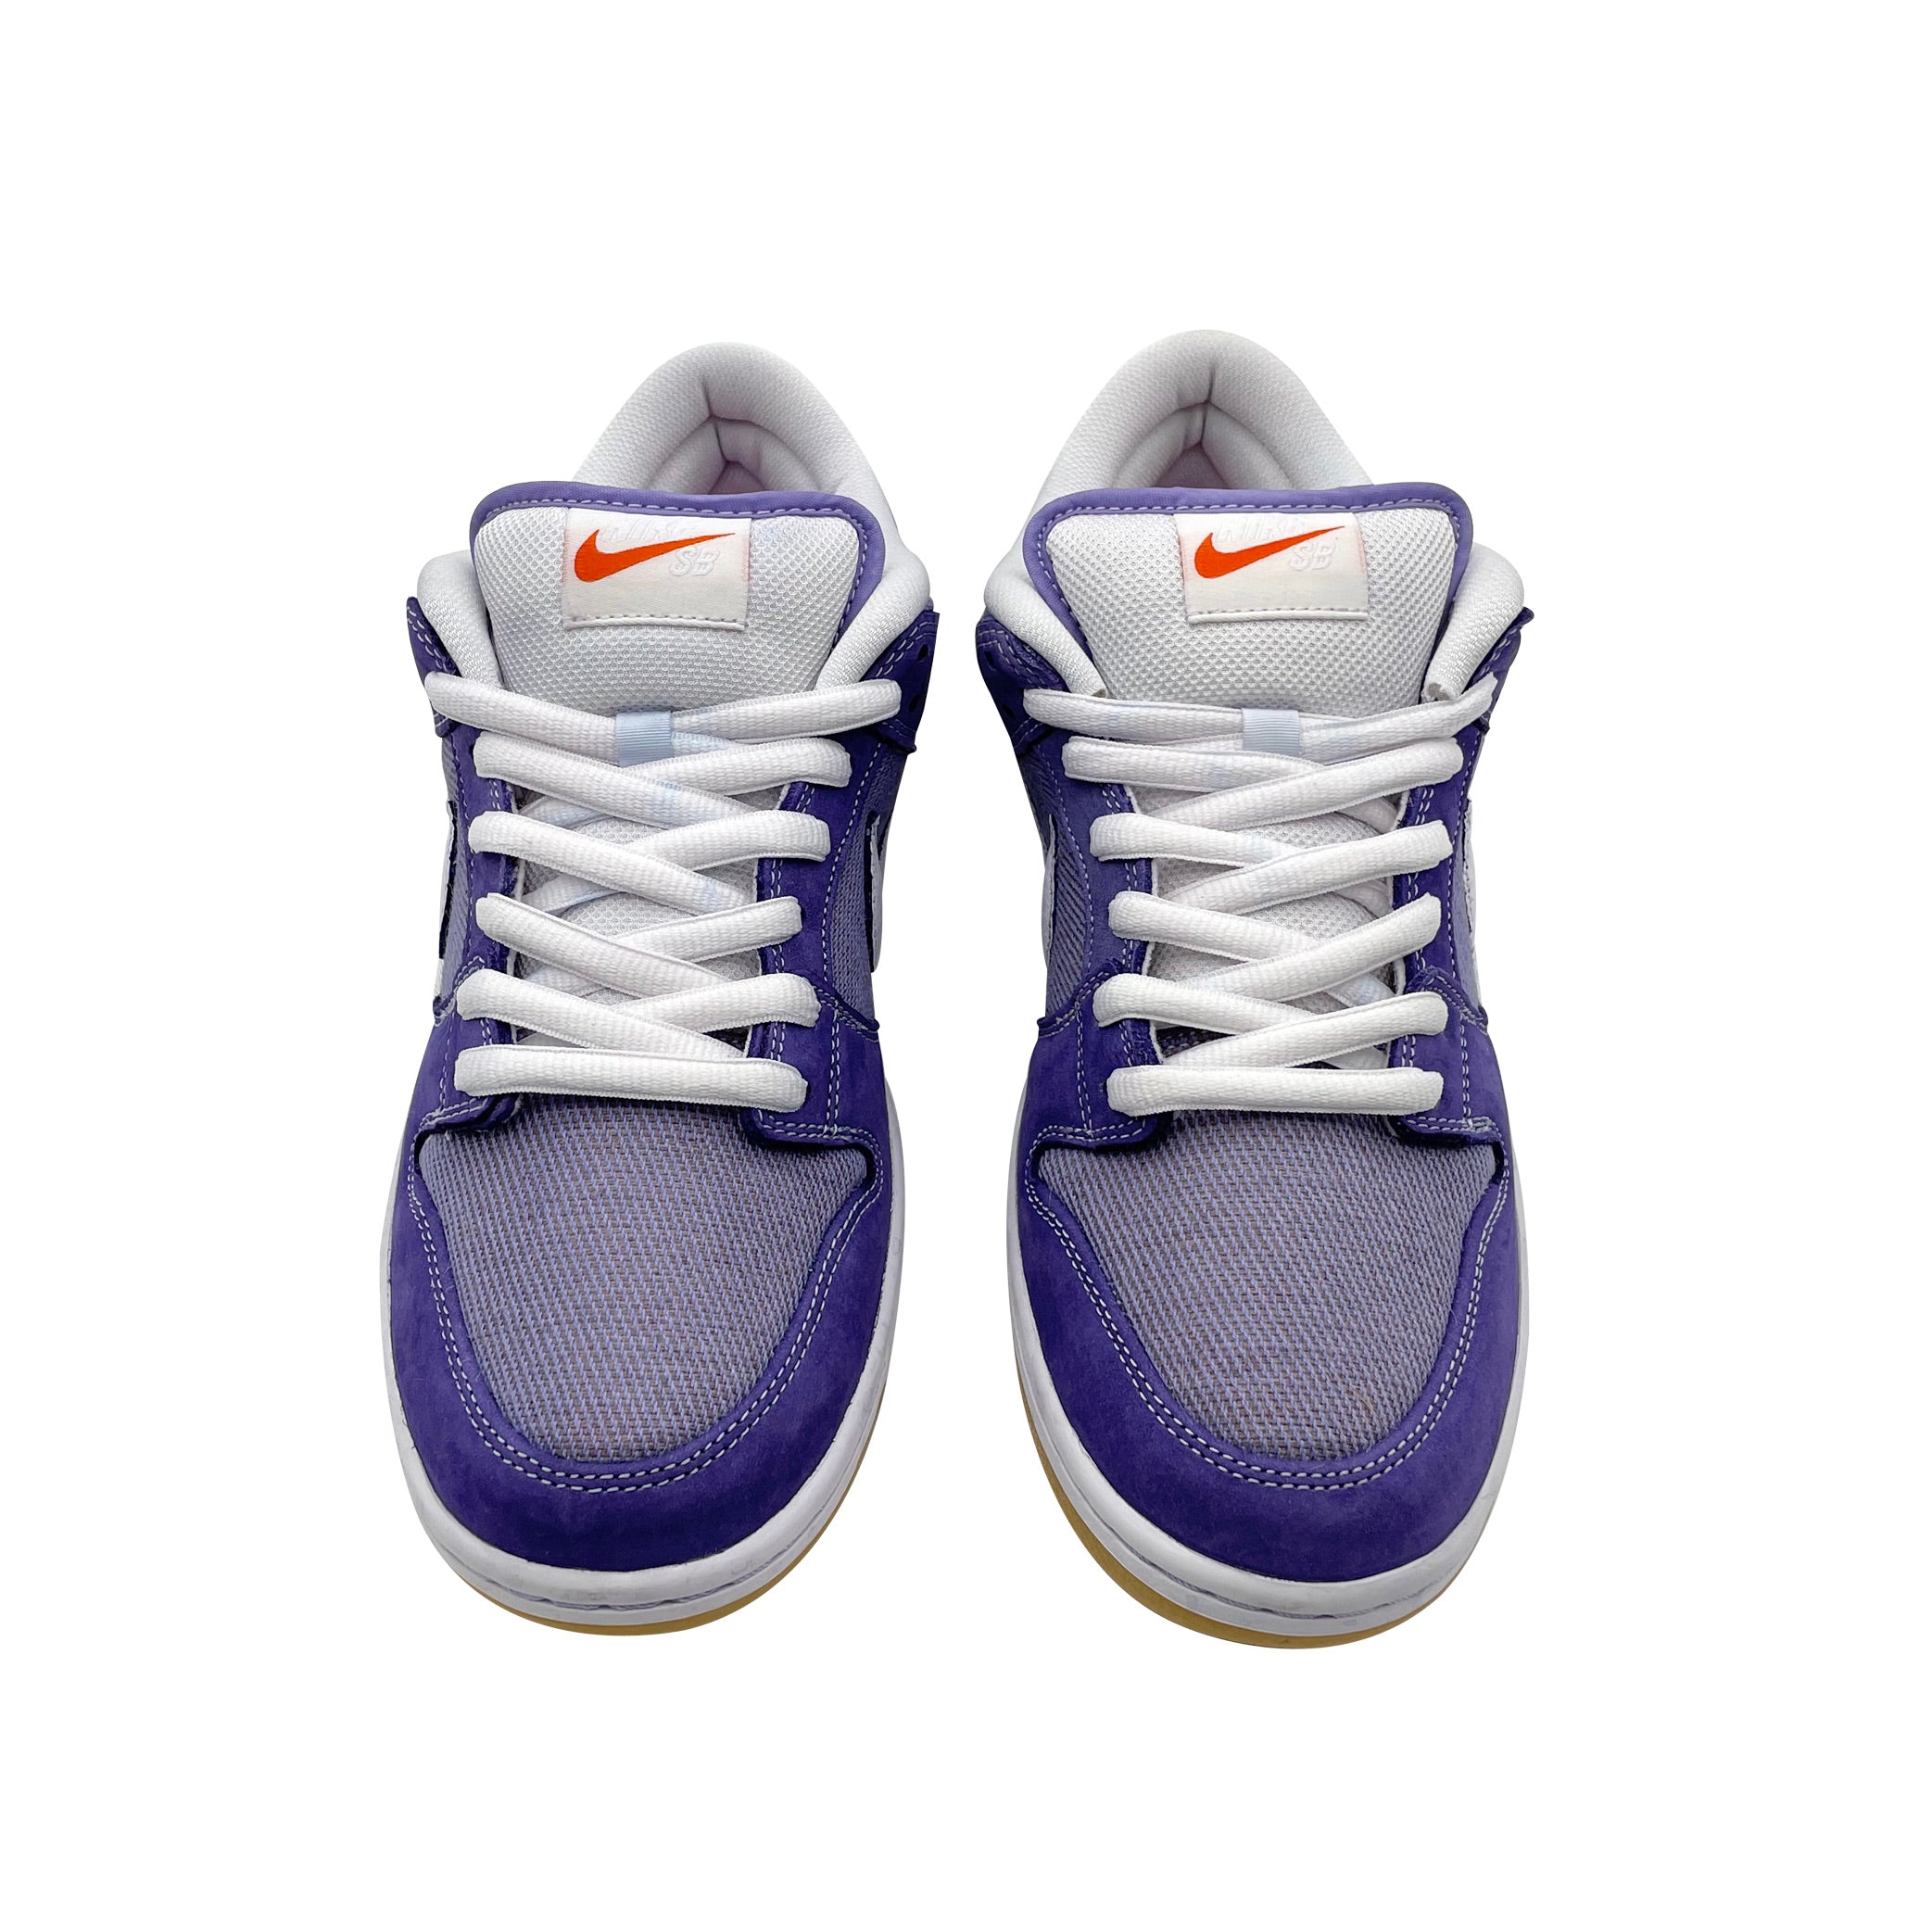 Nike SB Dunk Low Pro Unbleached Lilac